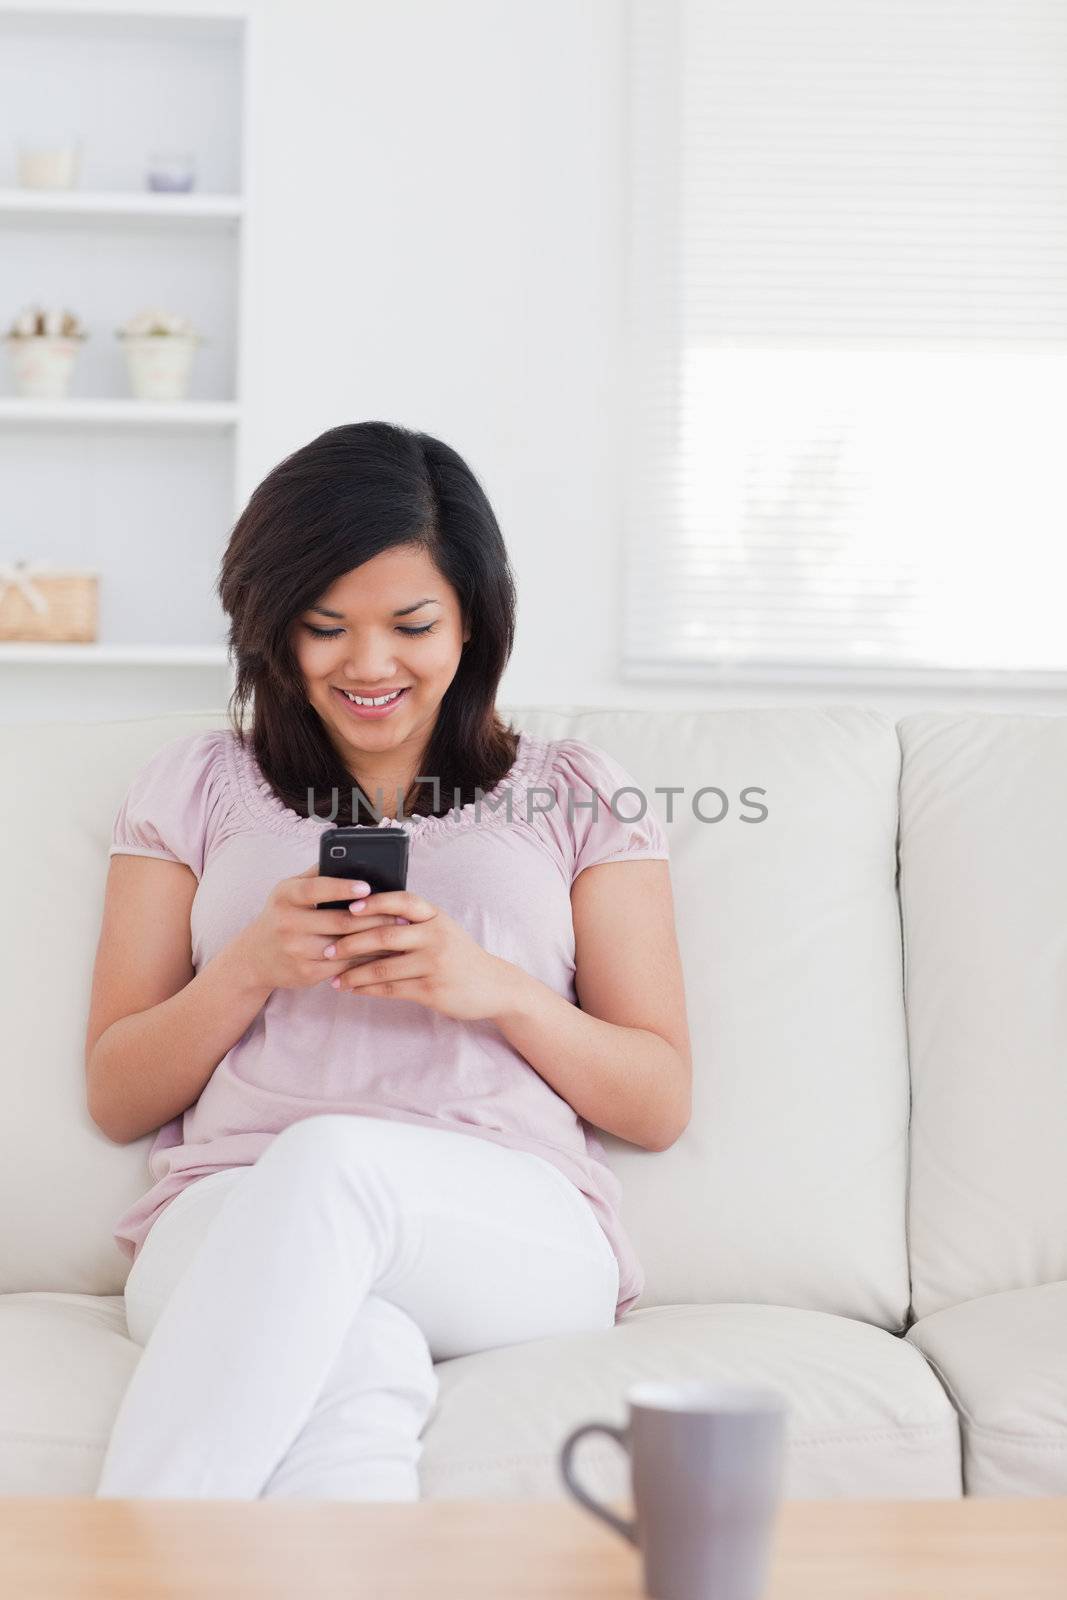 Woman sitting on a couch and holding a phone in a living room